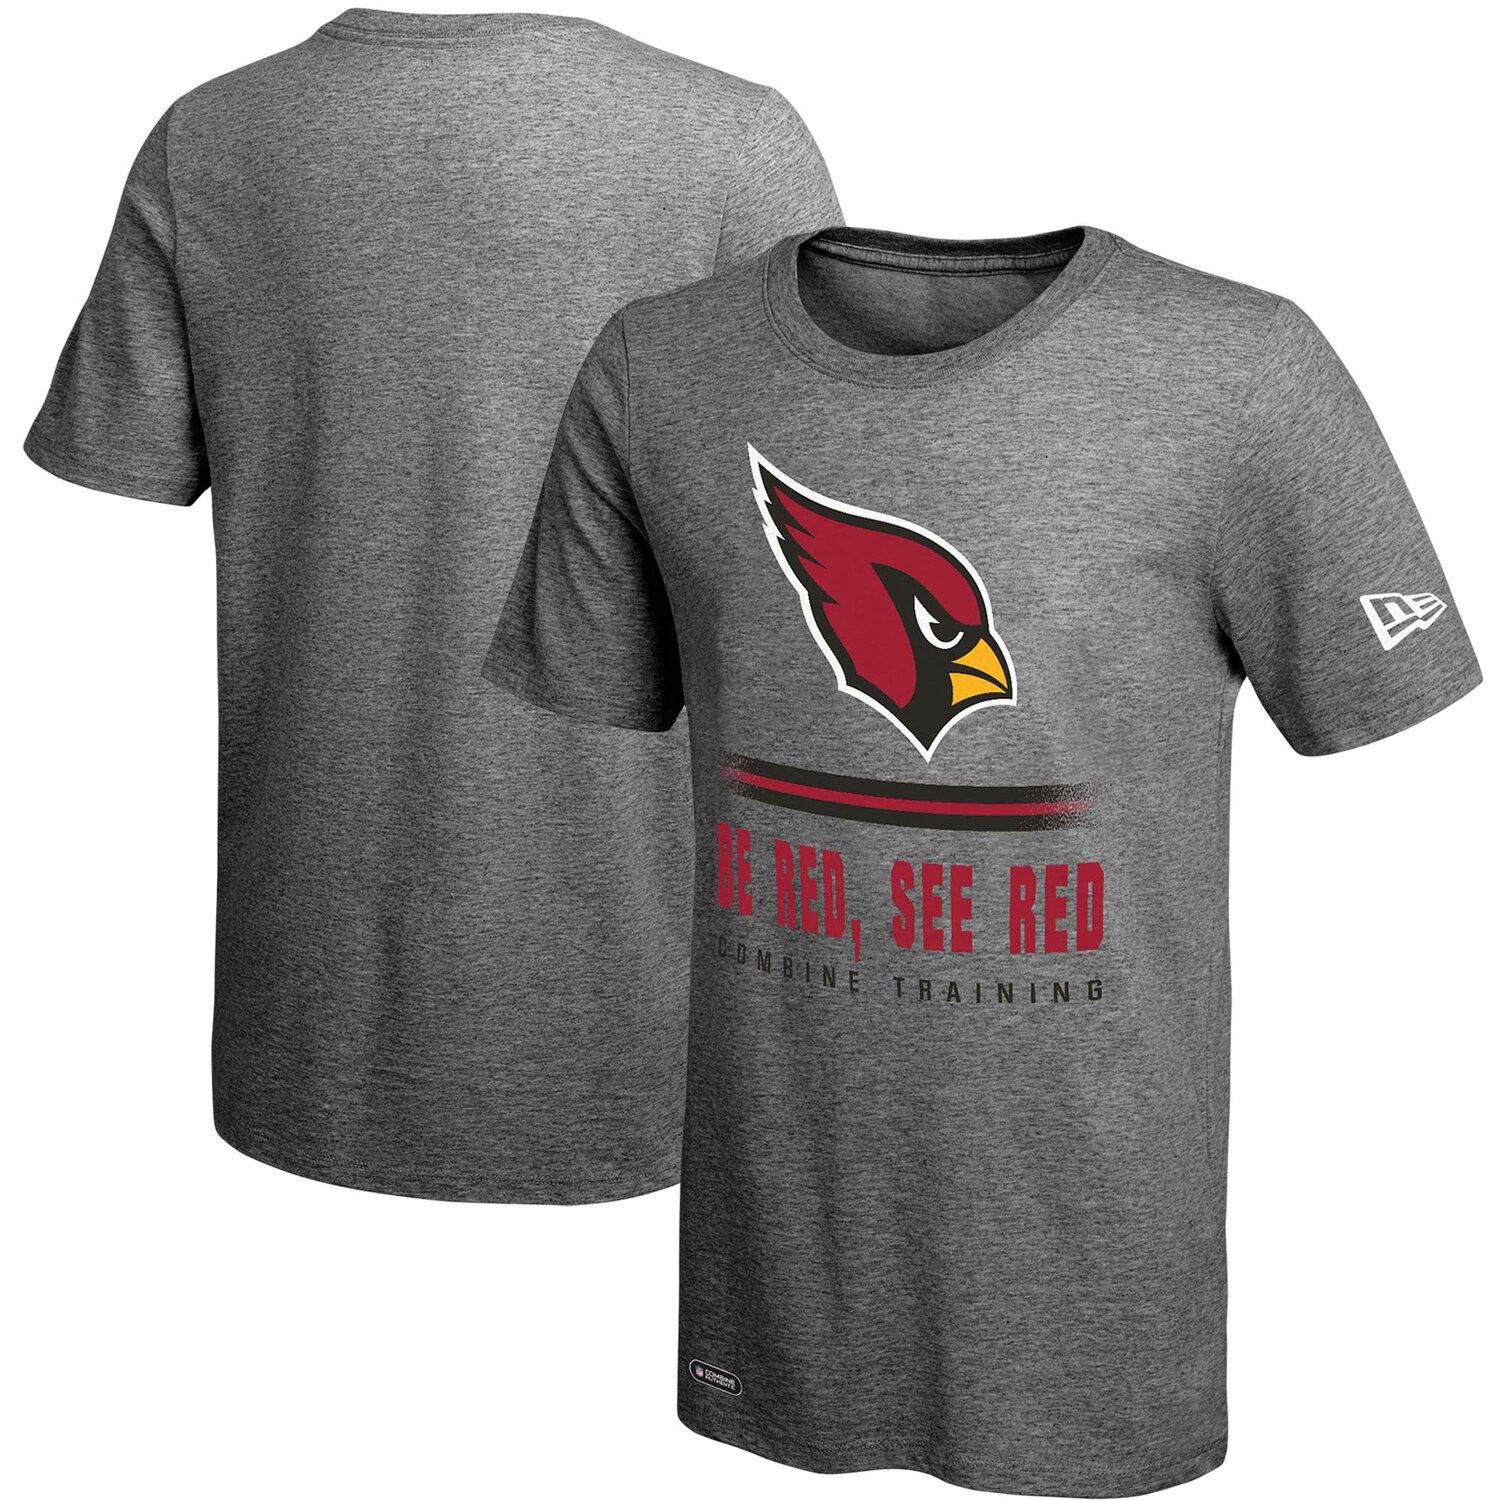 shirts with cardinals on them